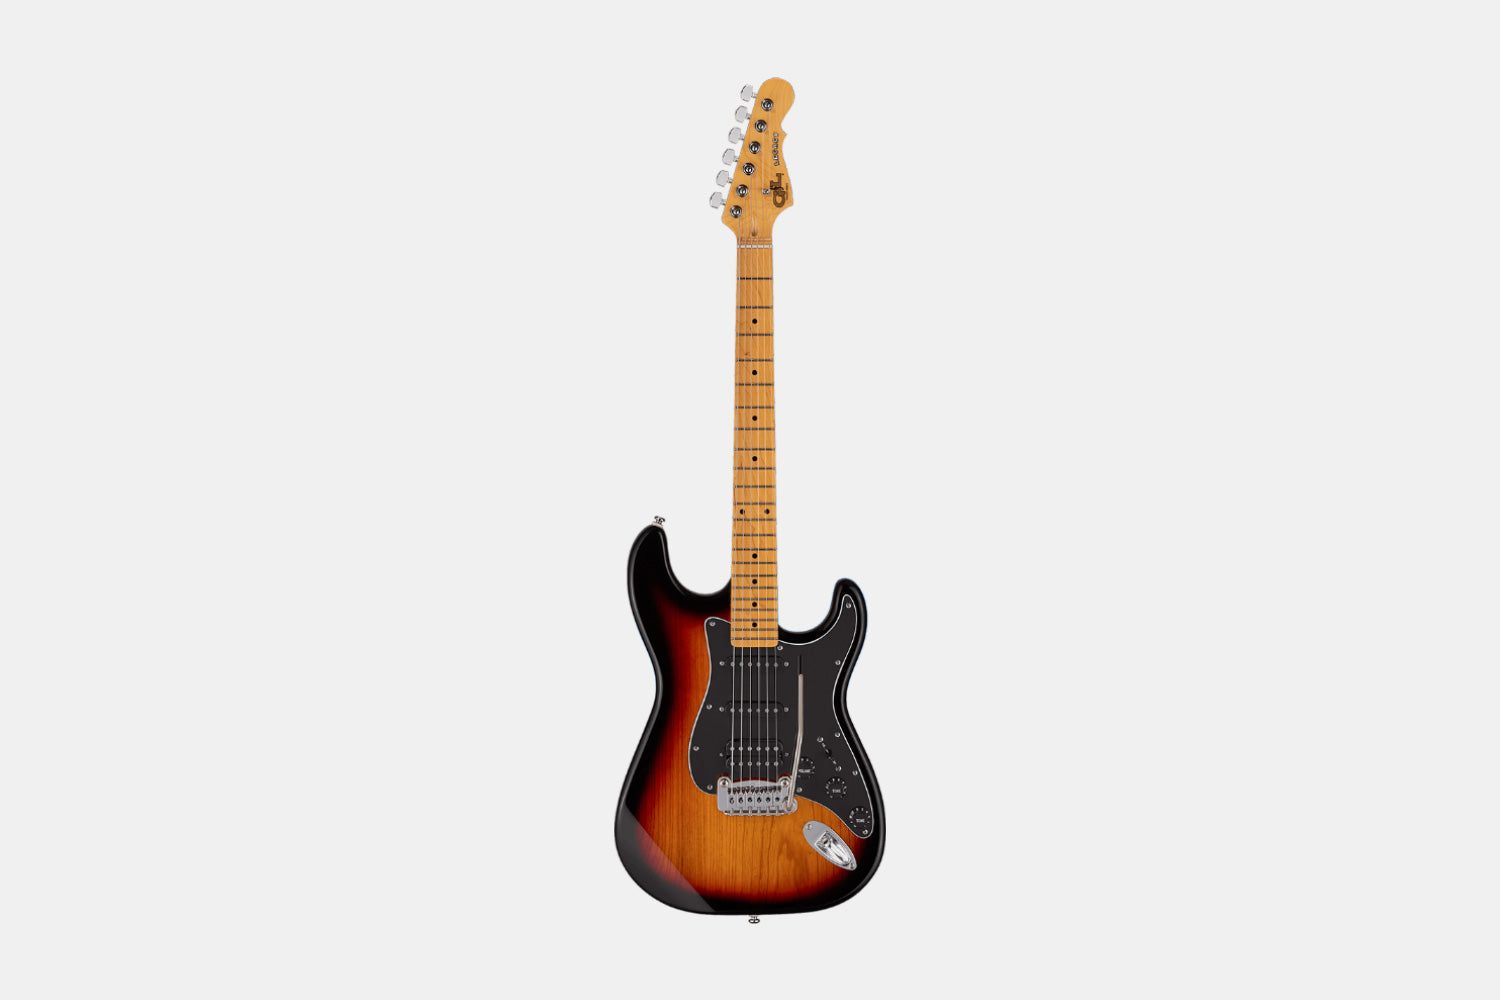 G&L guitars can be bought at Music All In | For 40 years the 